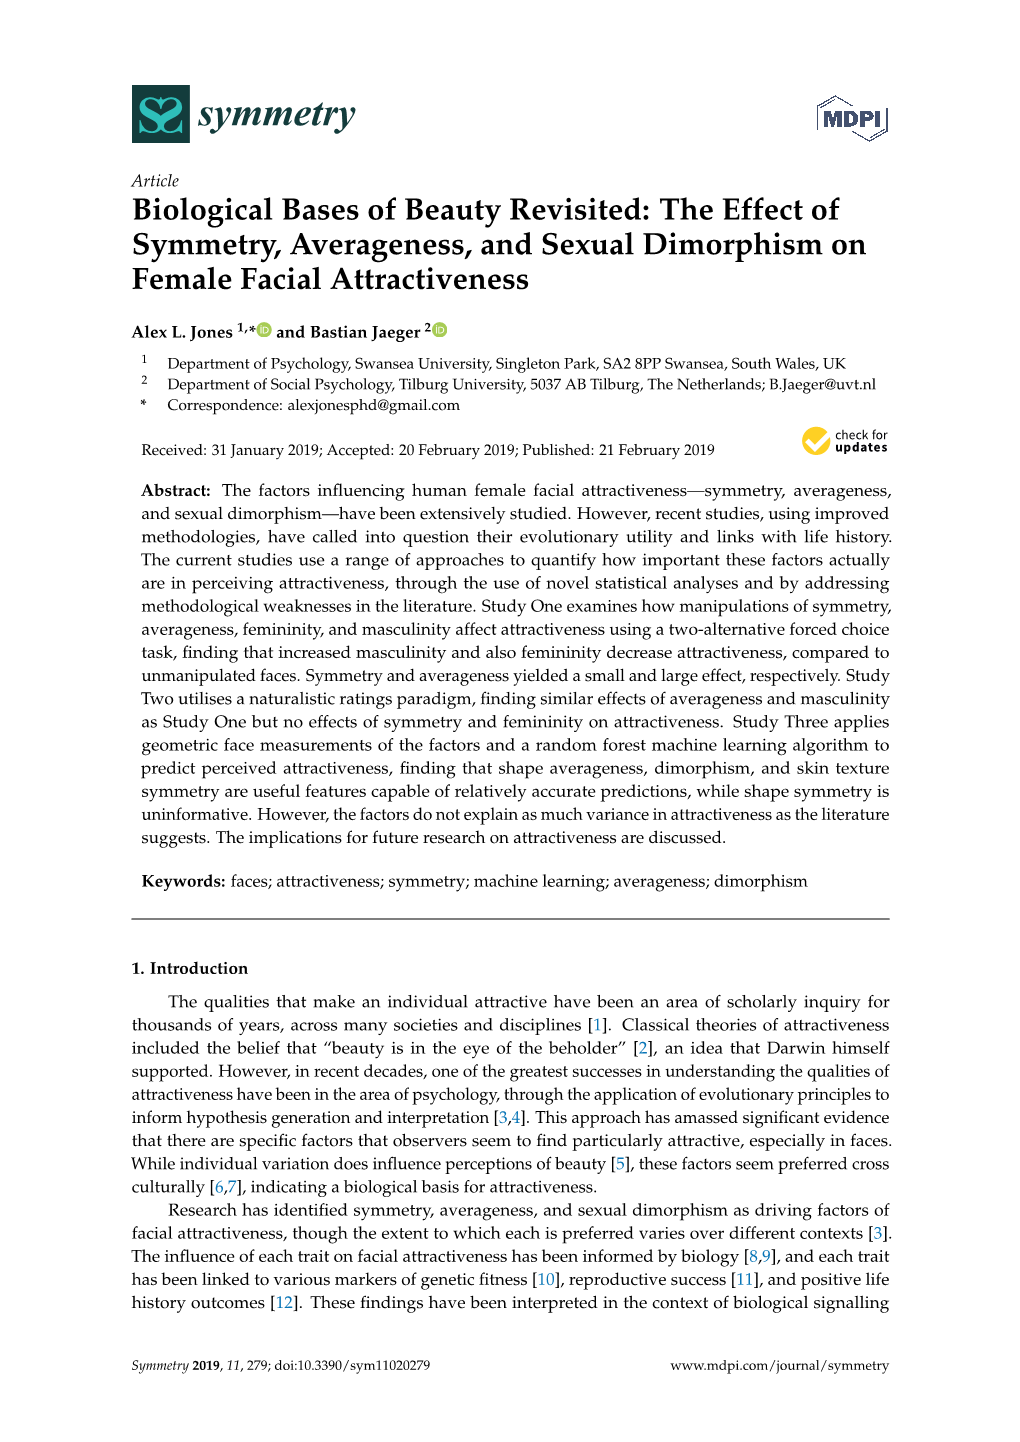 The Effect of Symmetry, Averageness, and Sexual Dimorphism on Female Facial Attractiveness